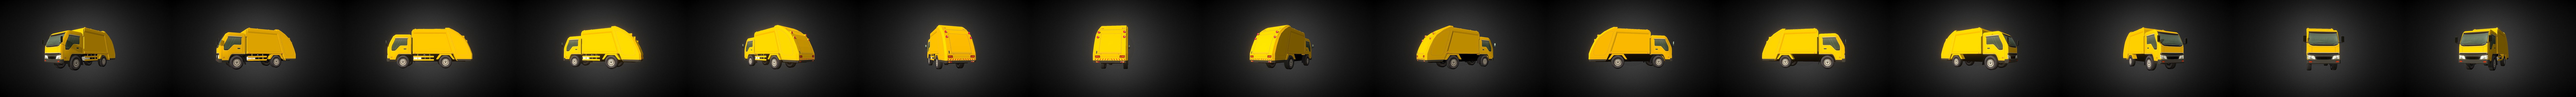 Garbage Truck Download Free 3d Model By Lung Ong Cardboard 5d505fd Sketchfab